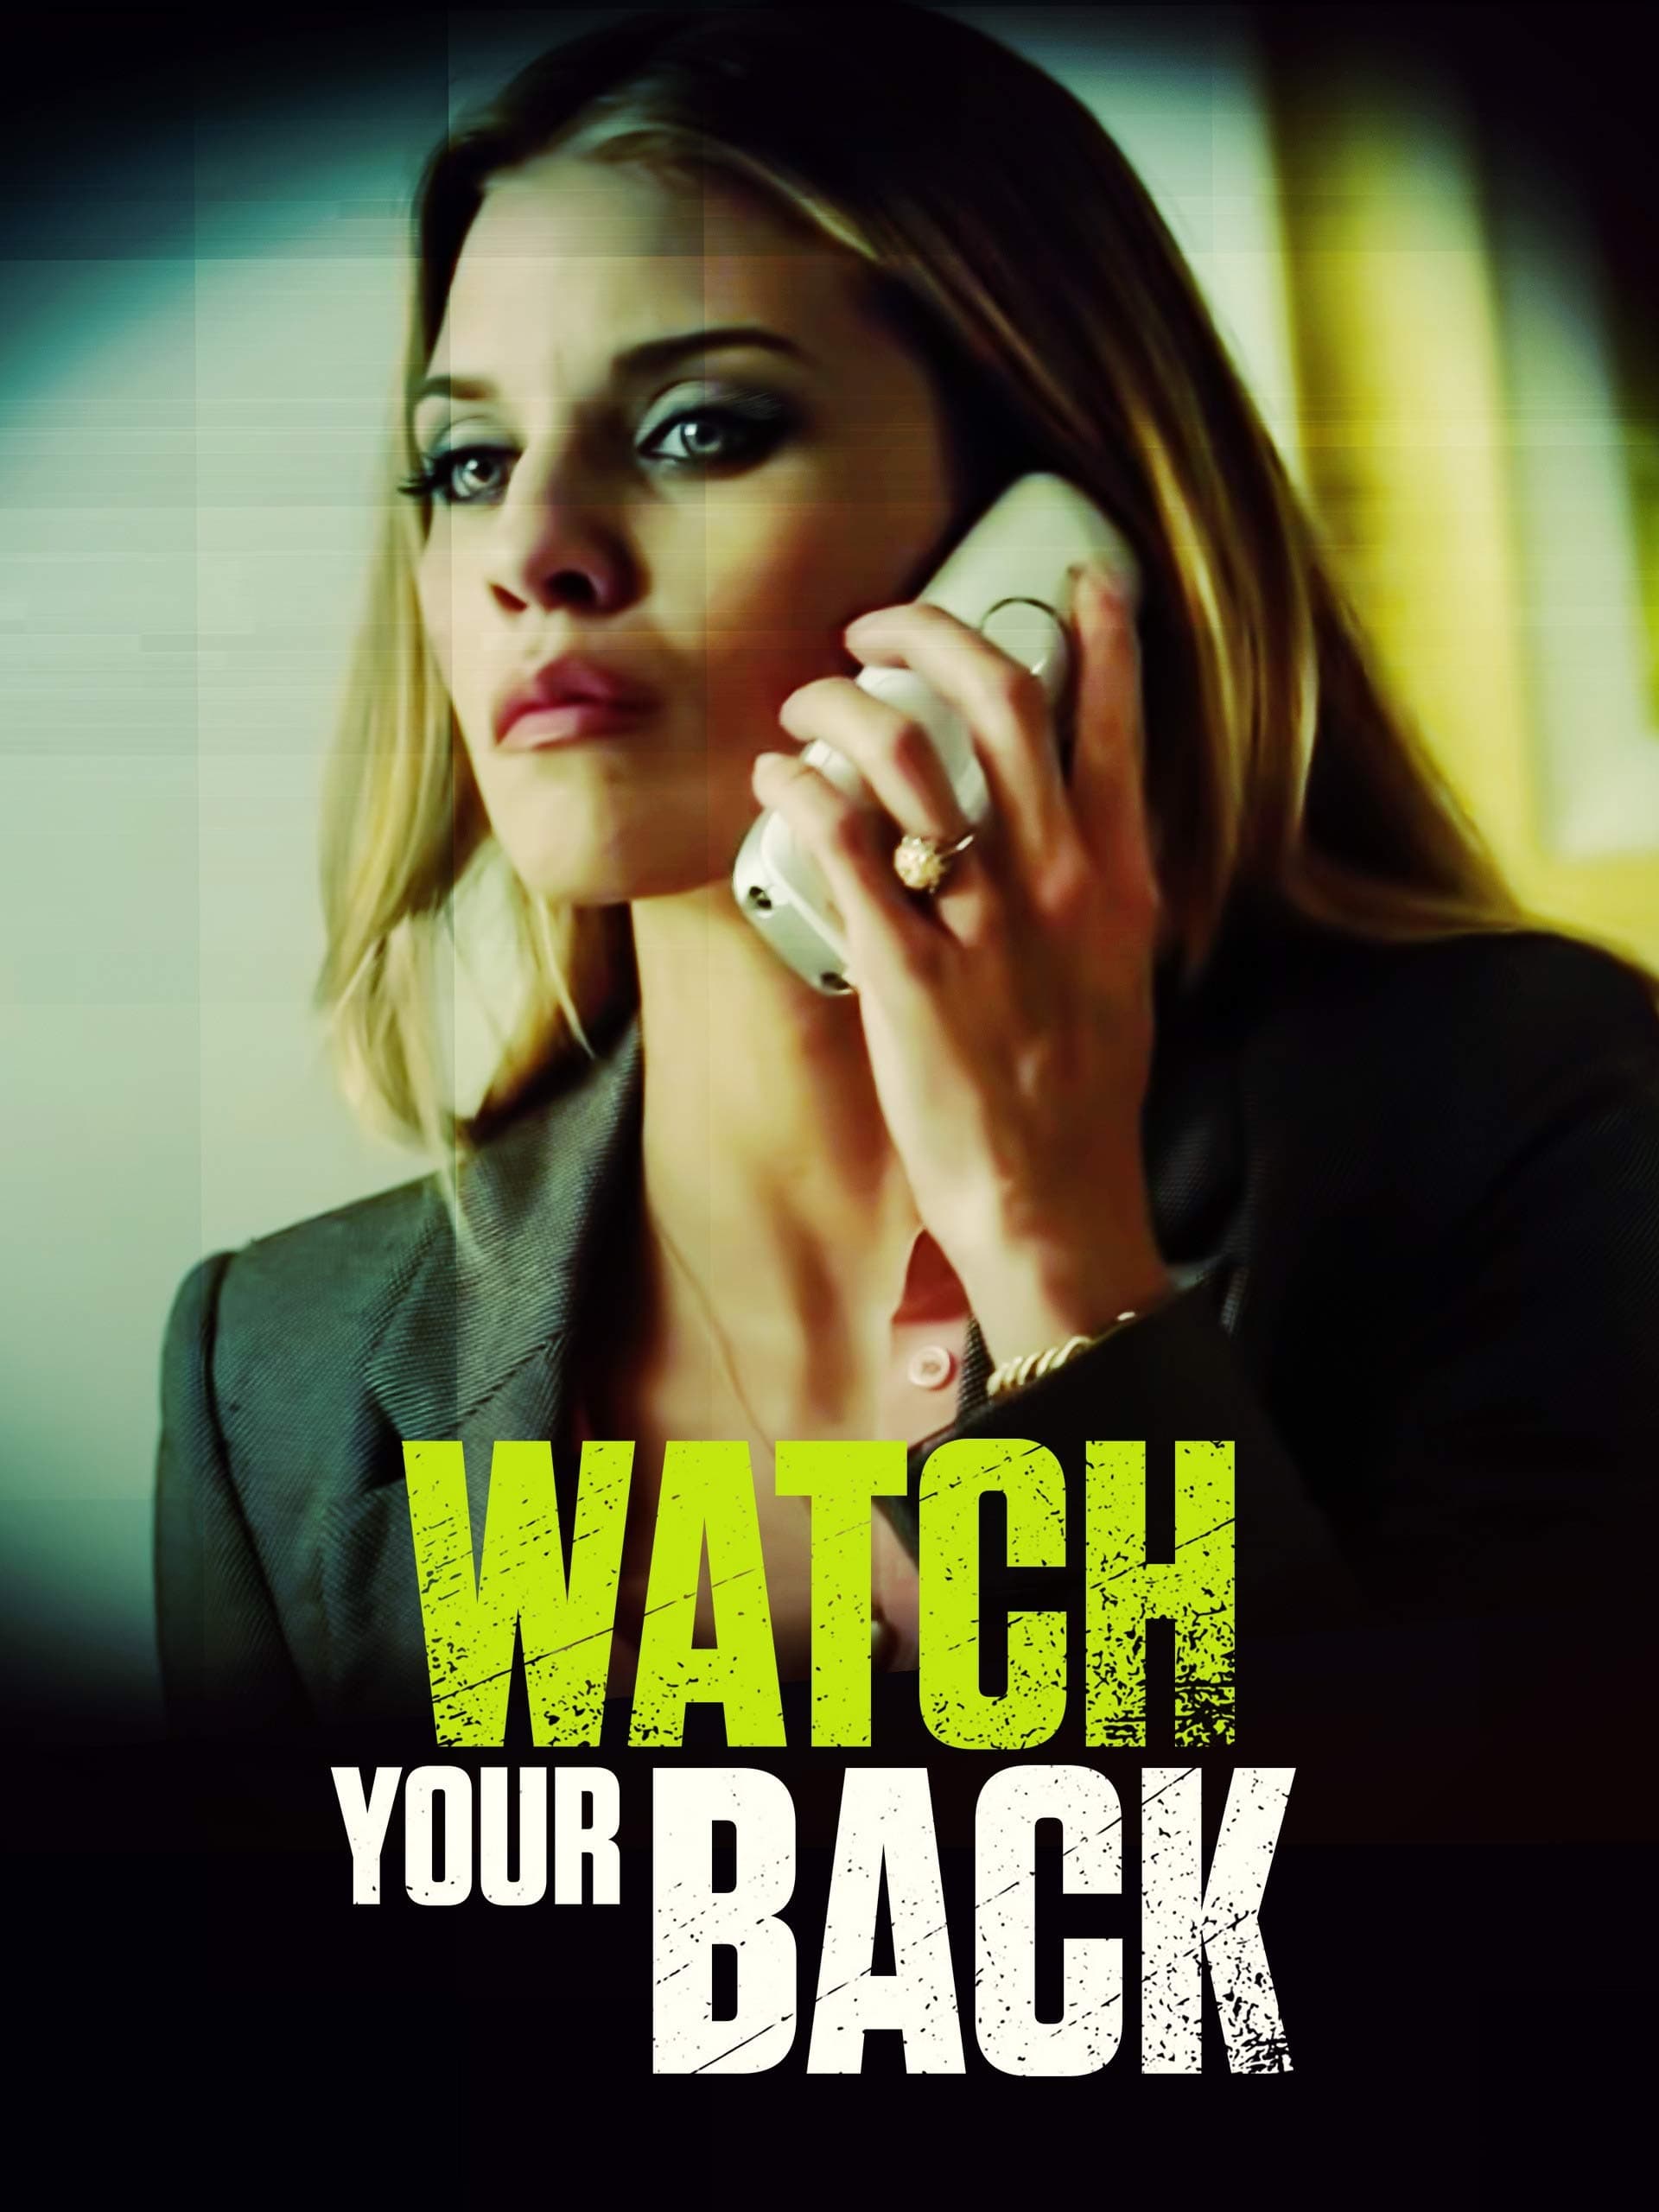 Watch Your Back (2015)